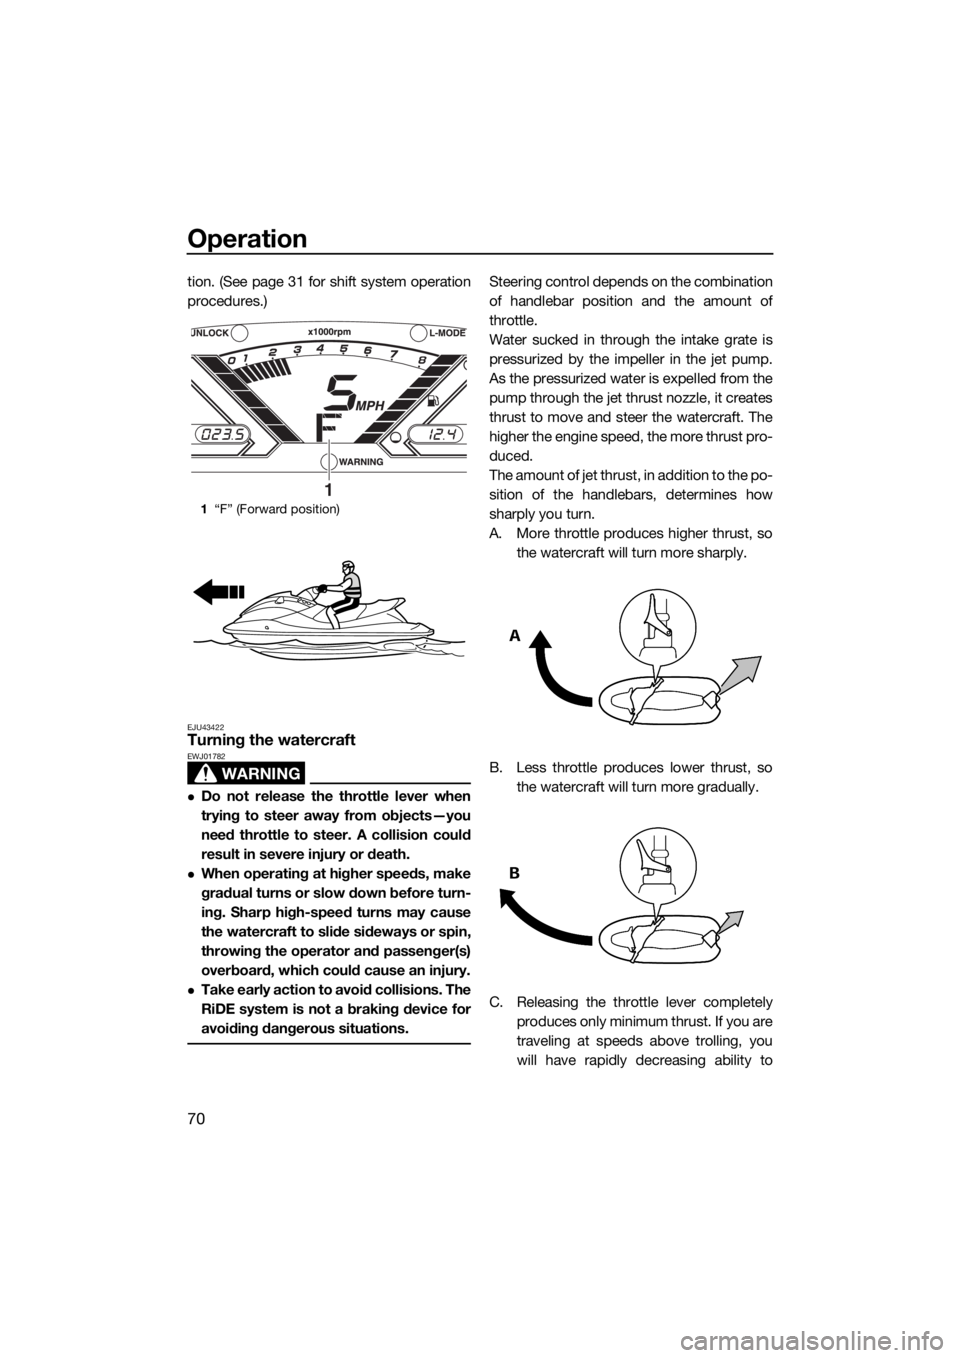 YAMAHA VX CRUISER 2017  Owners Manual Operation
70
tion. (See page 31 for shift system operation
procedures.)
EJU43422Turning the watercraft
WARNING
EWJ01782
Do not release the throttle lever when
trying to steer away from objects—yo